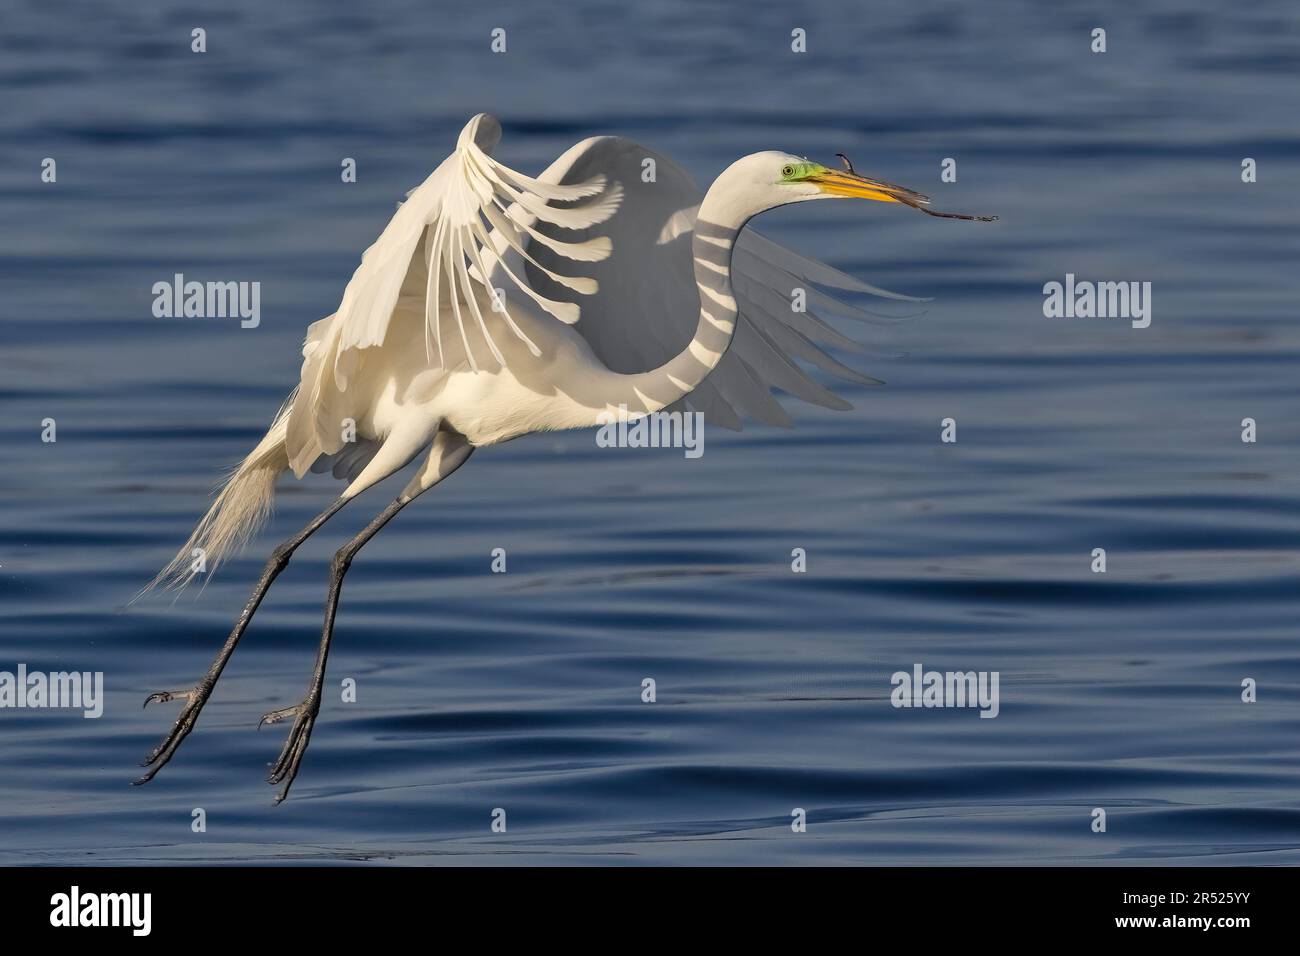 Graceful Great Egret - Great Egret in flight carrying nesting material for his nest during spring.   This image is also available as a black and white Stock Photo